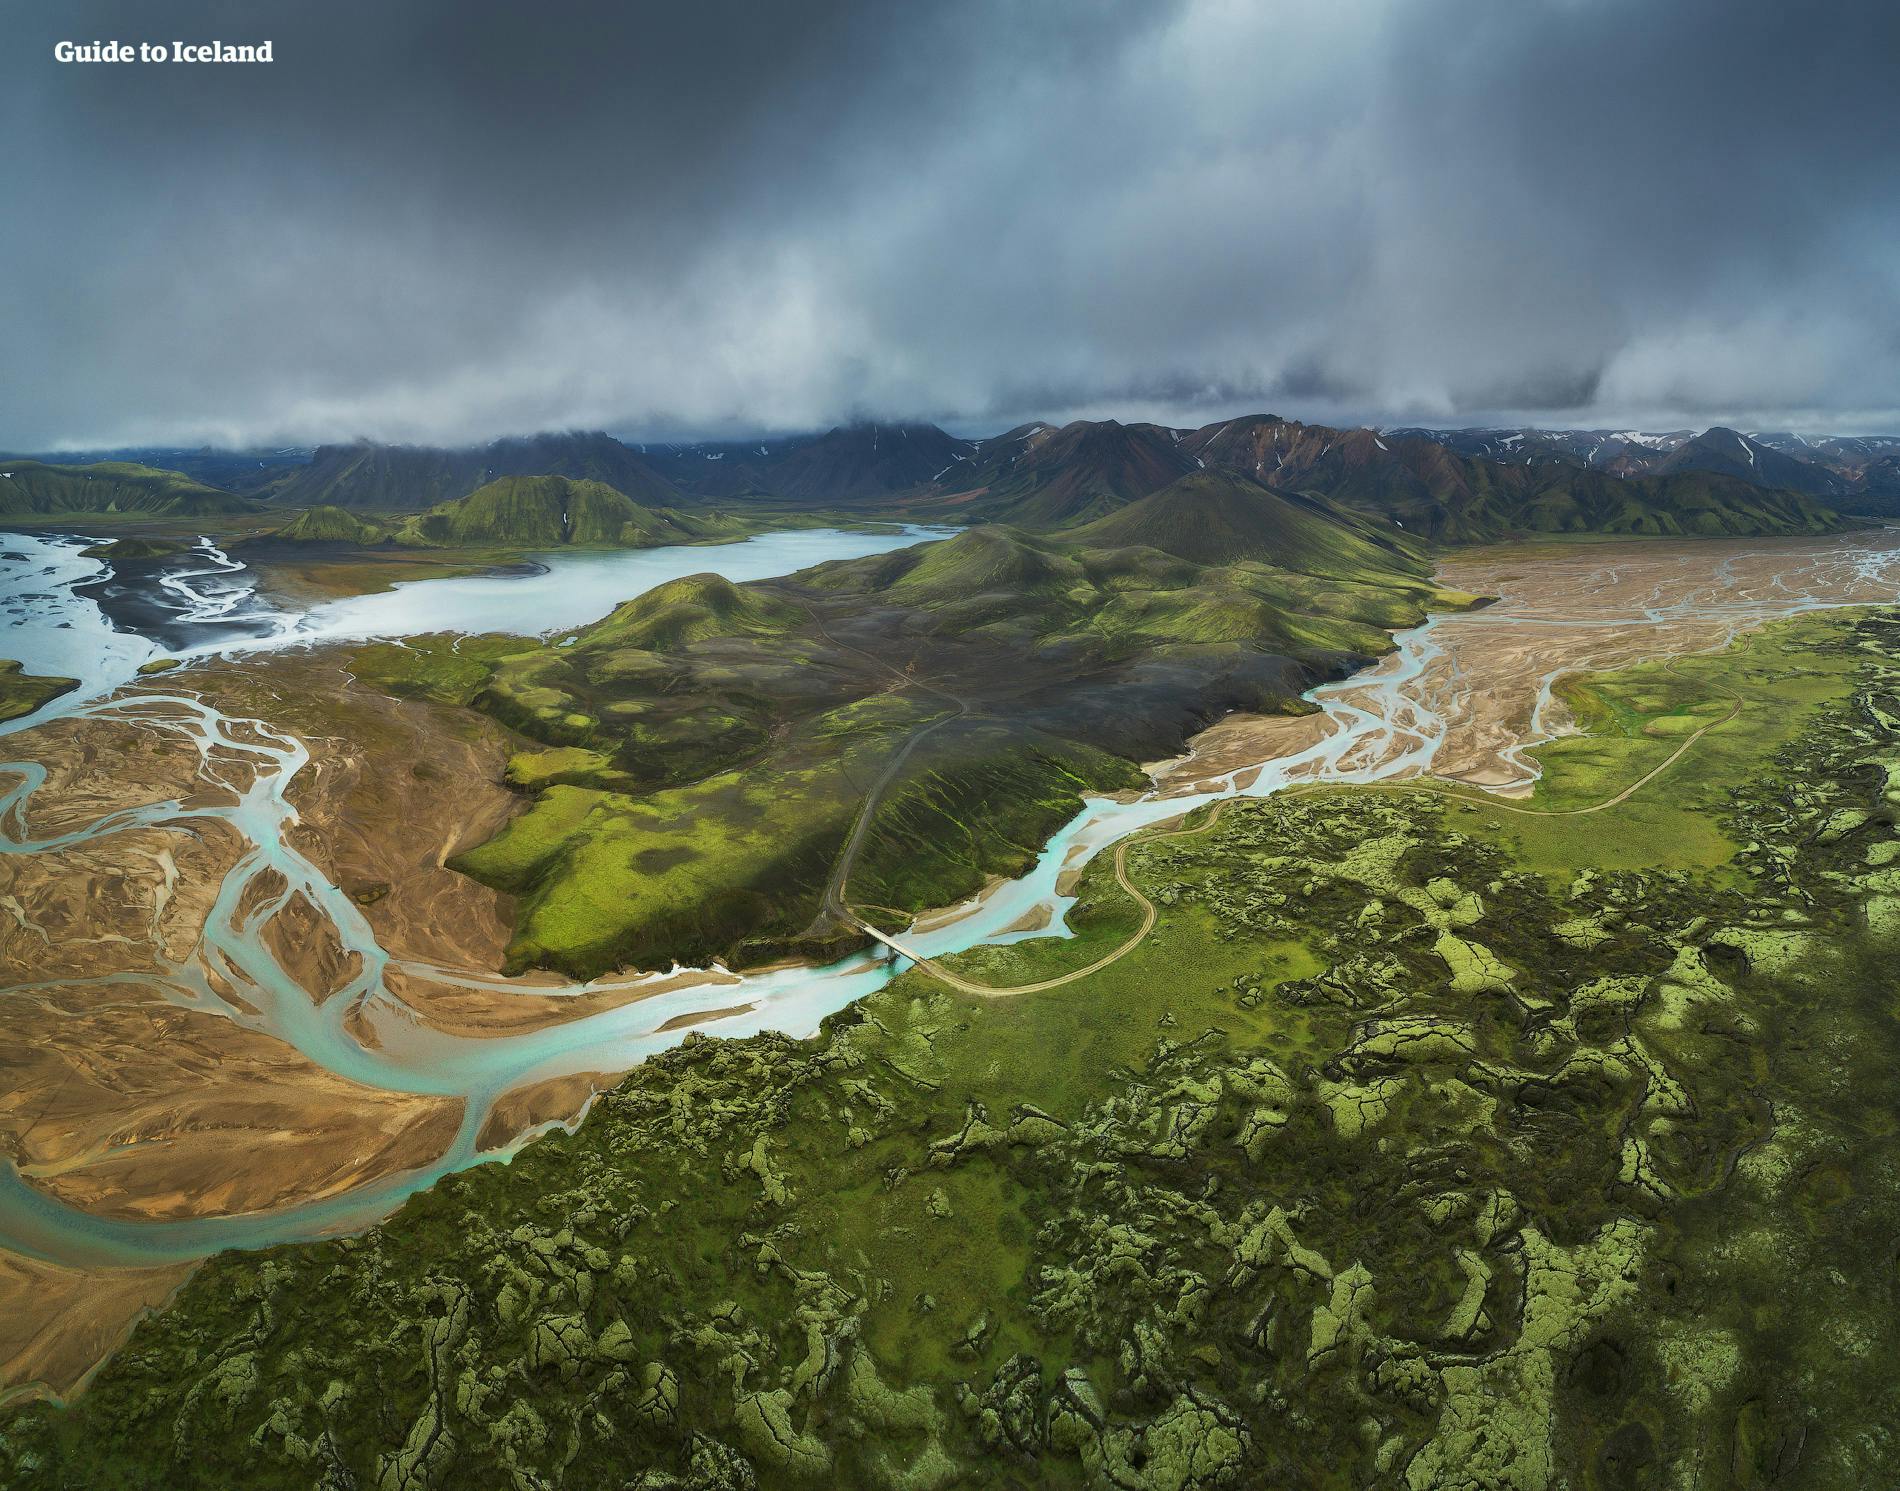 A sweeping volcanic landscape in the Highlands of Iceland.